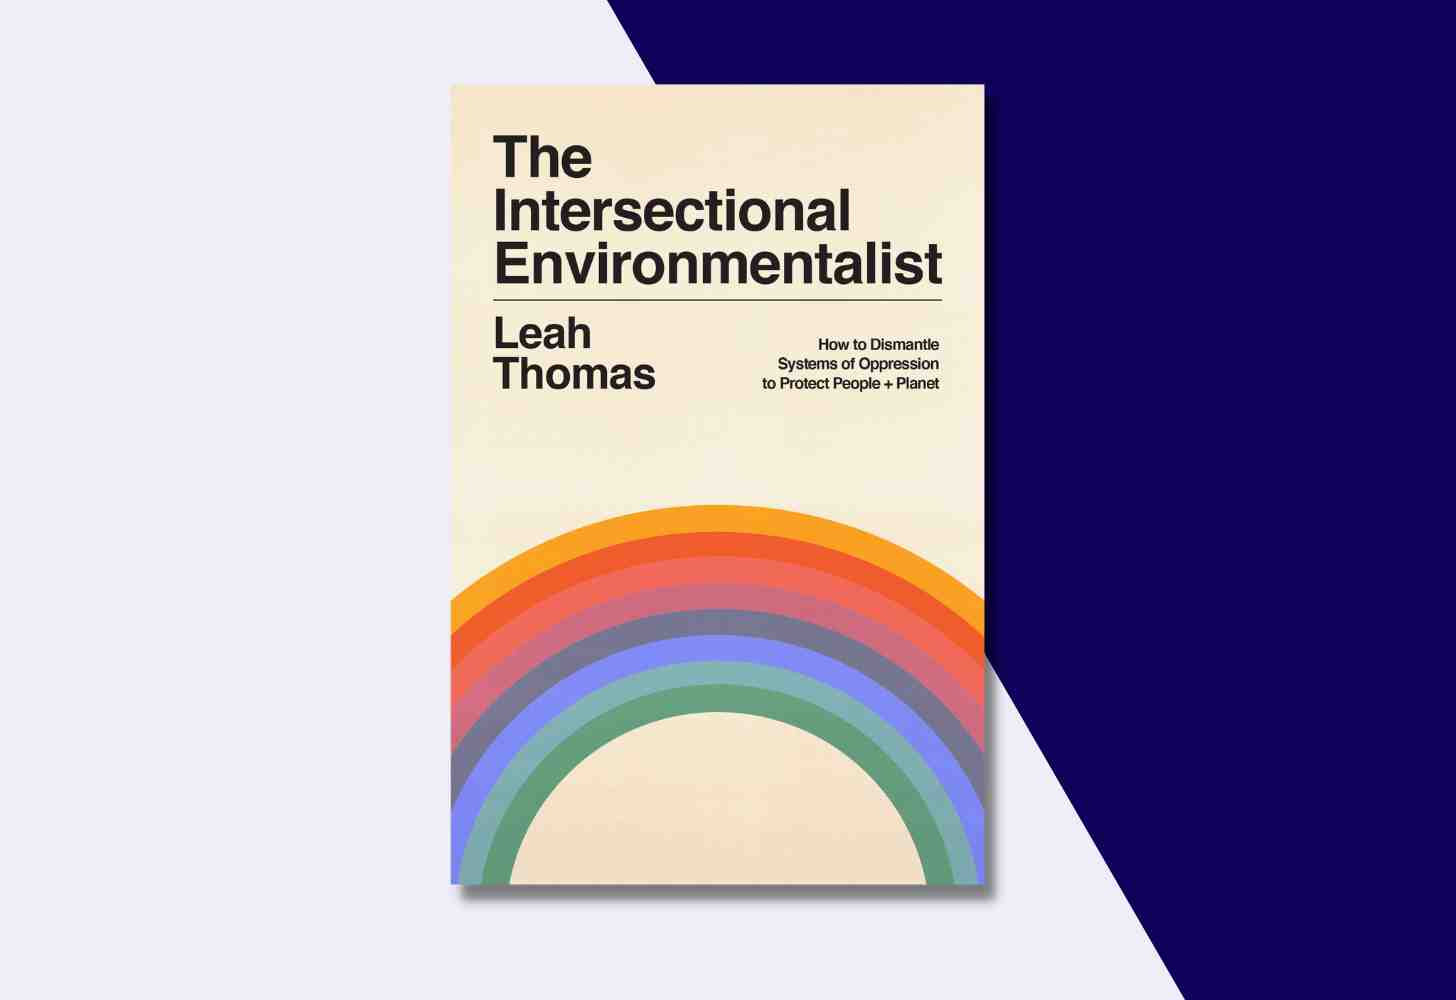 The Cover Of: “The Intersectional Environmentalist: How to Dismantle Systems of Oppression to Protect People + Planet” by Leah Thomas